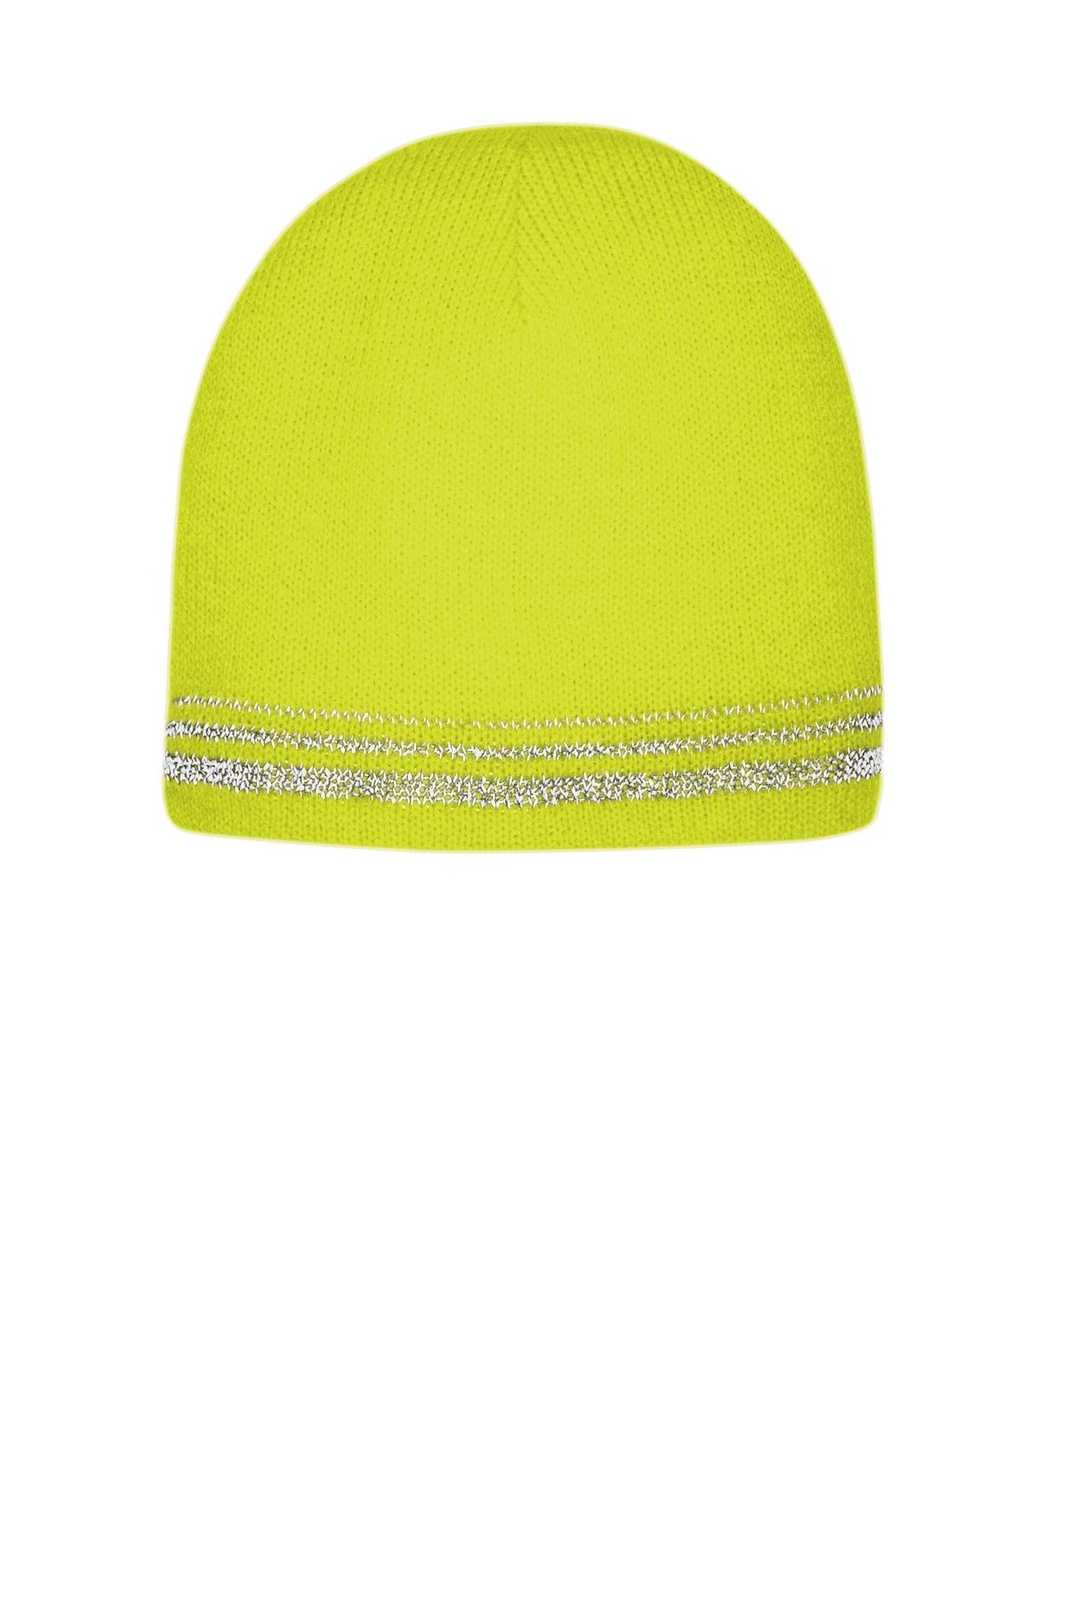 CornerStone CS804 Lined Enhanced Visibility with Reflective Stripes Beanie CS804 - Safety Yellow Reflective - HIT a Double - 1